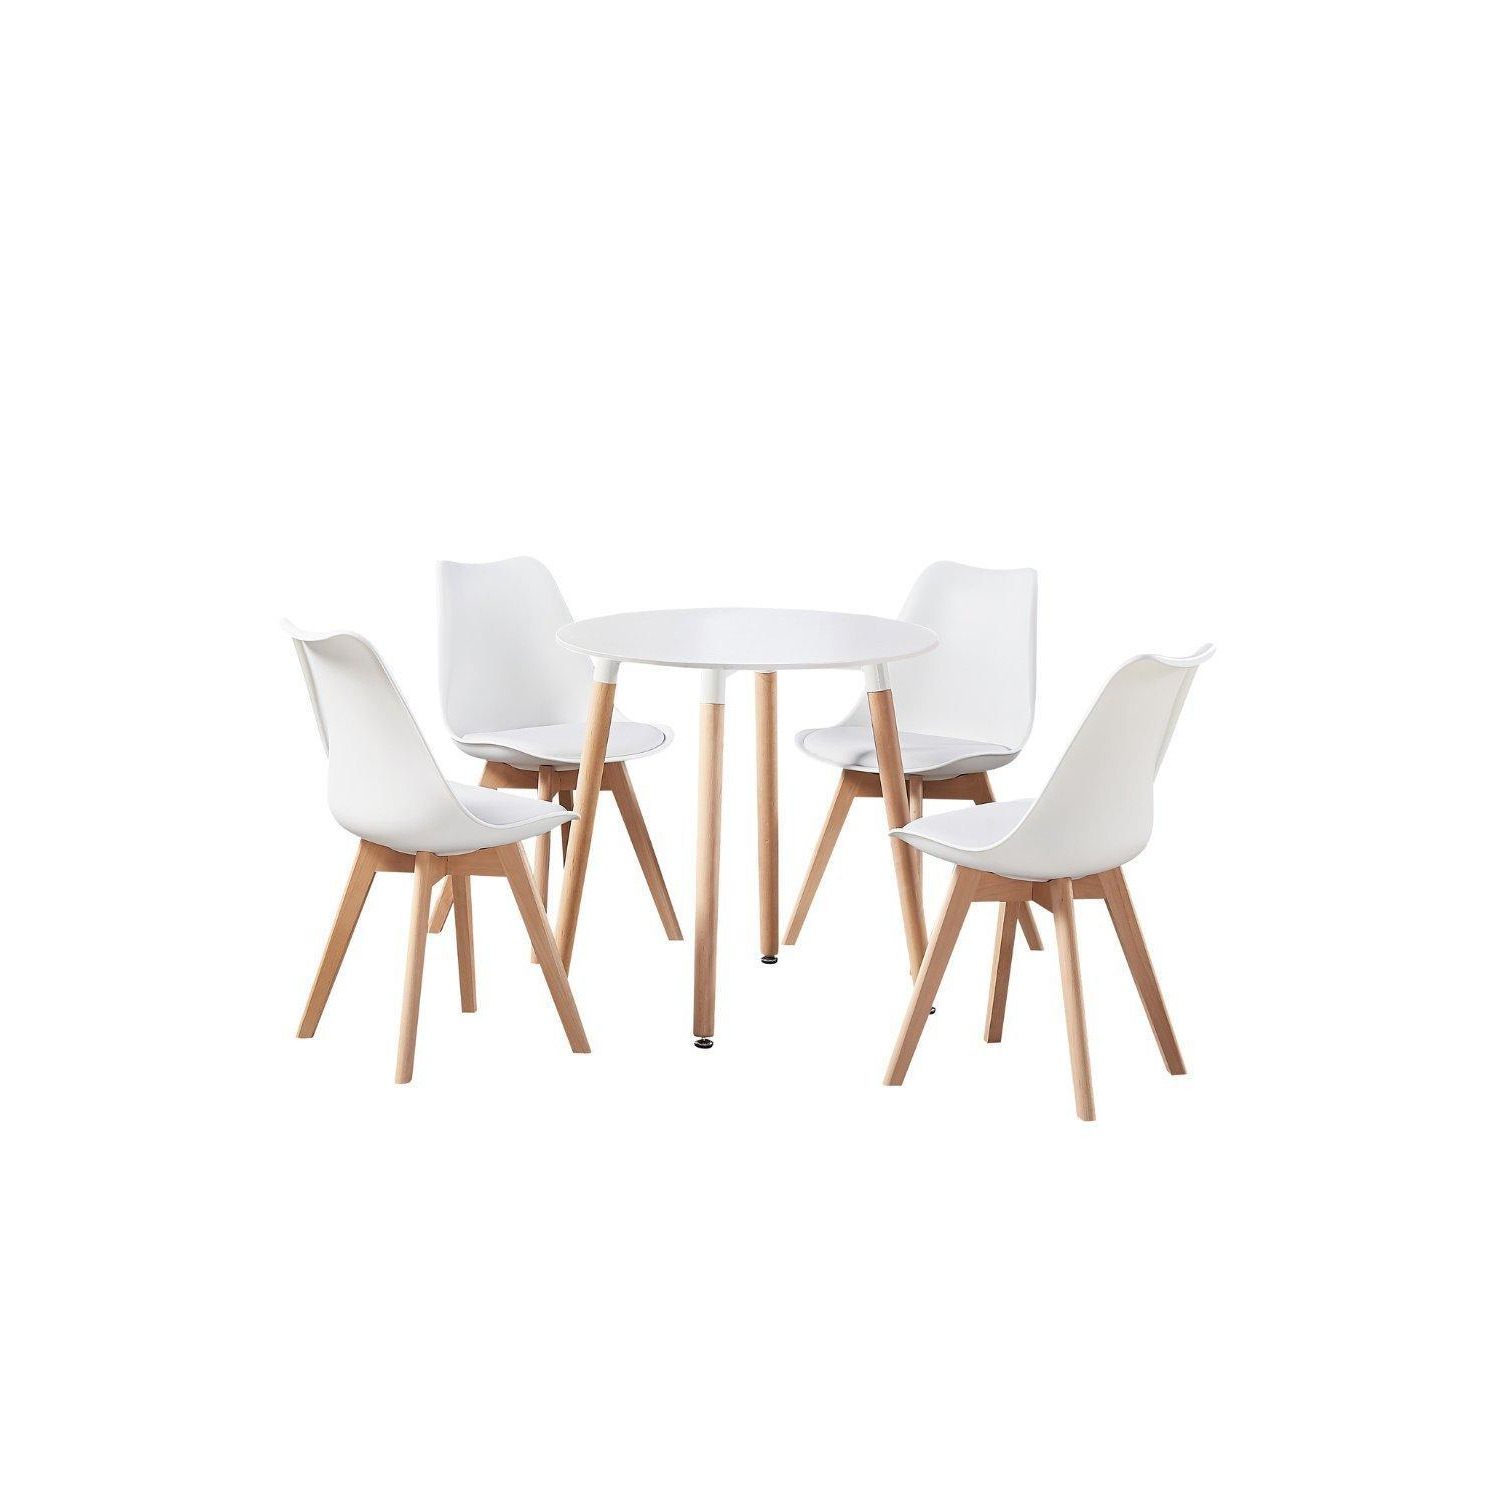 5PCs Dining Set - a Round Dining Table & Set of 4 Lorenzo Tulip chairs with Padded Seat - image 1